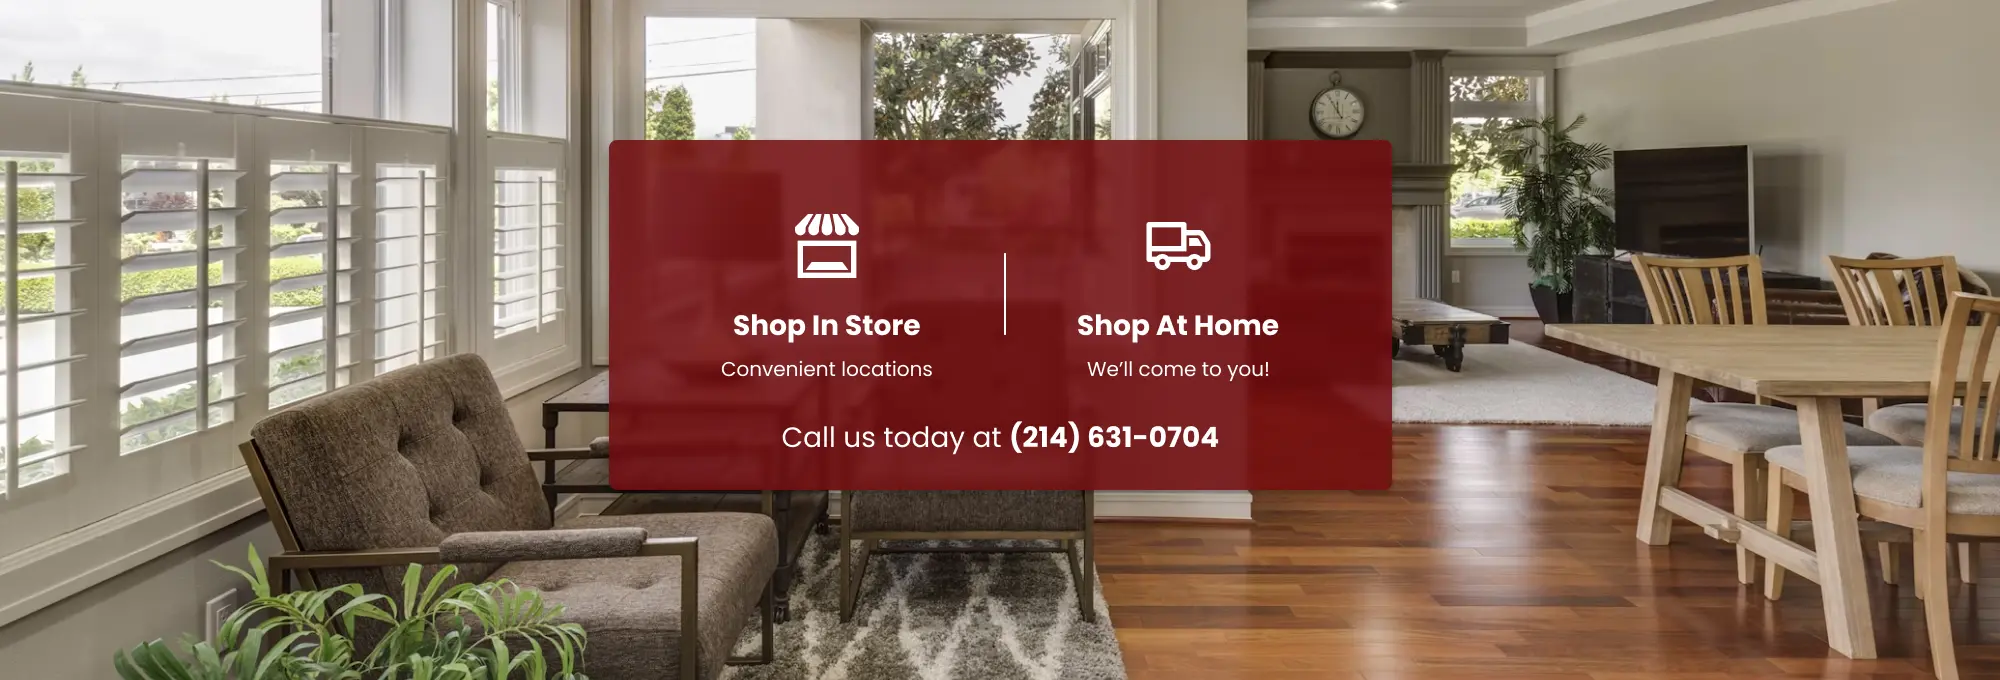 Shop in store or at home with CC Carpet in the Texas area for all your flooring needs!